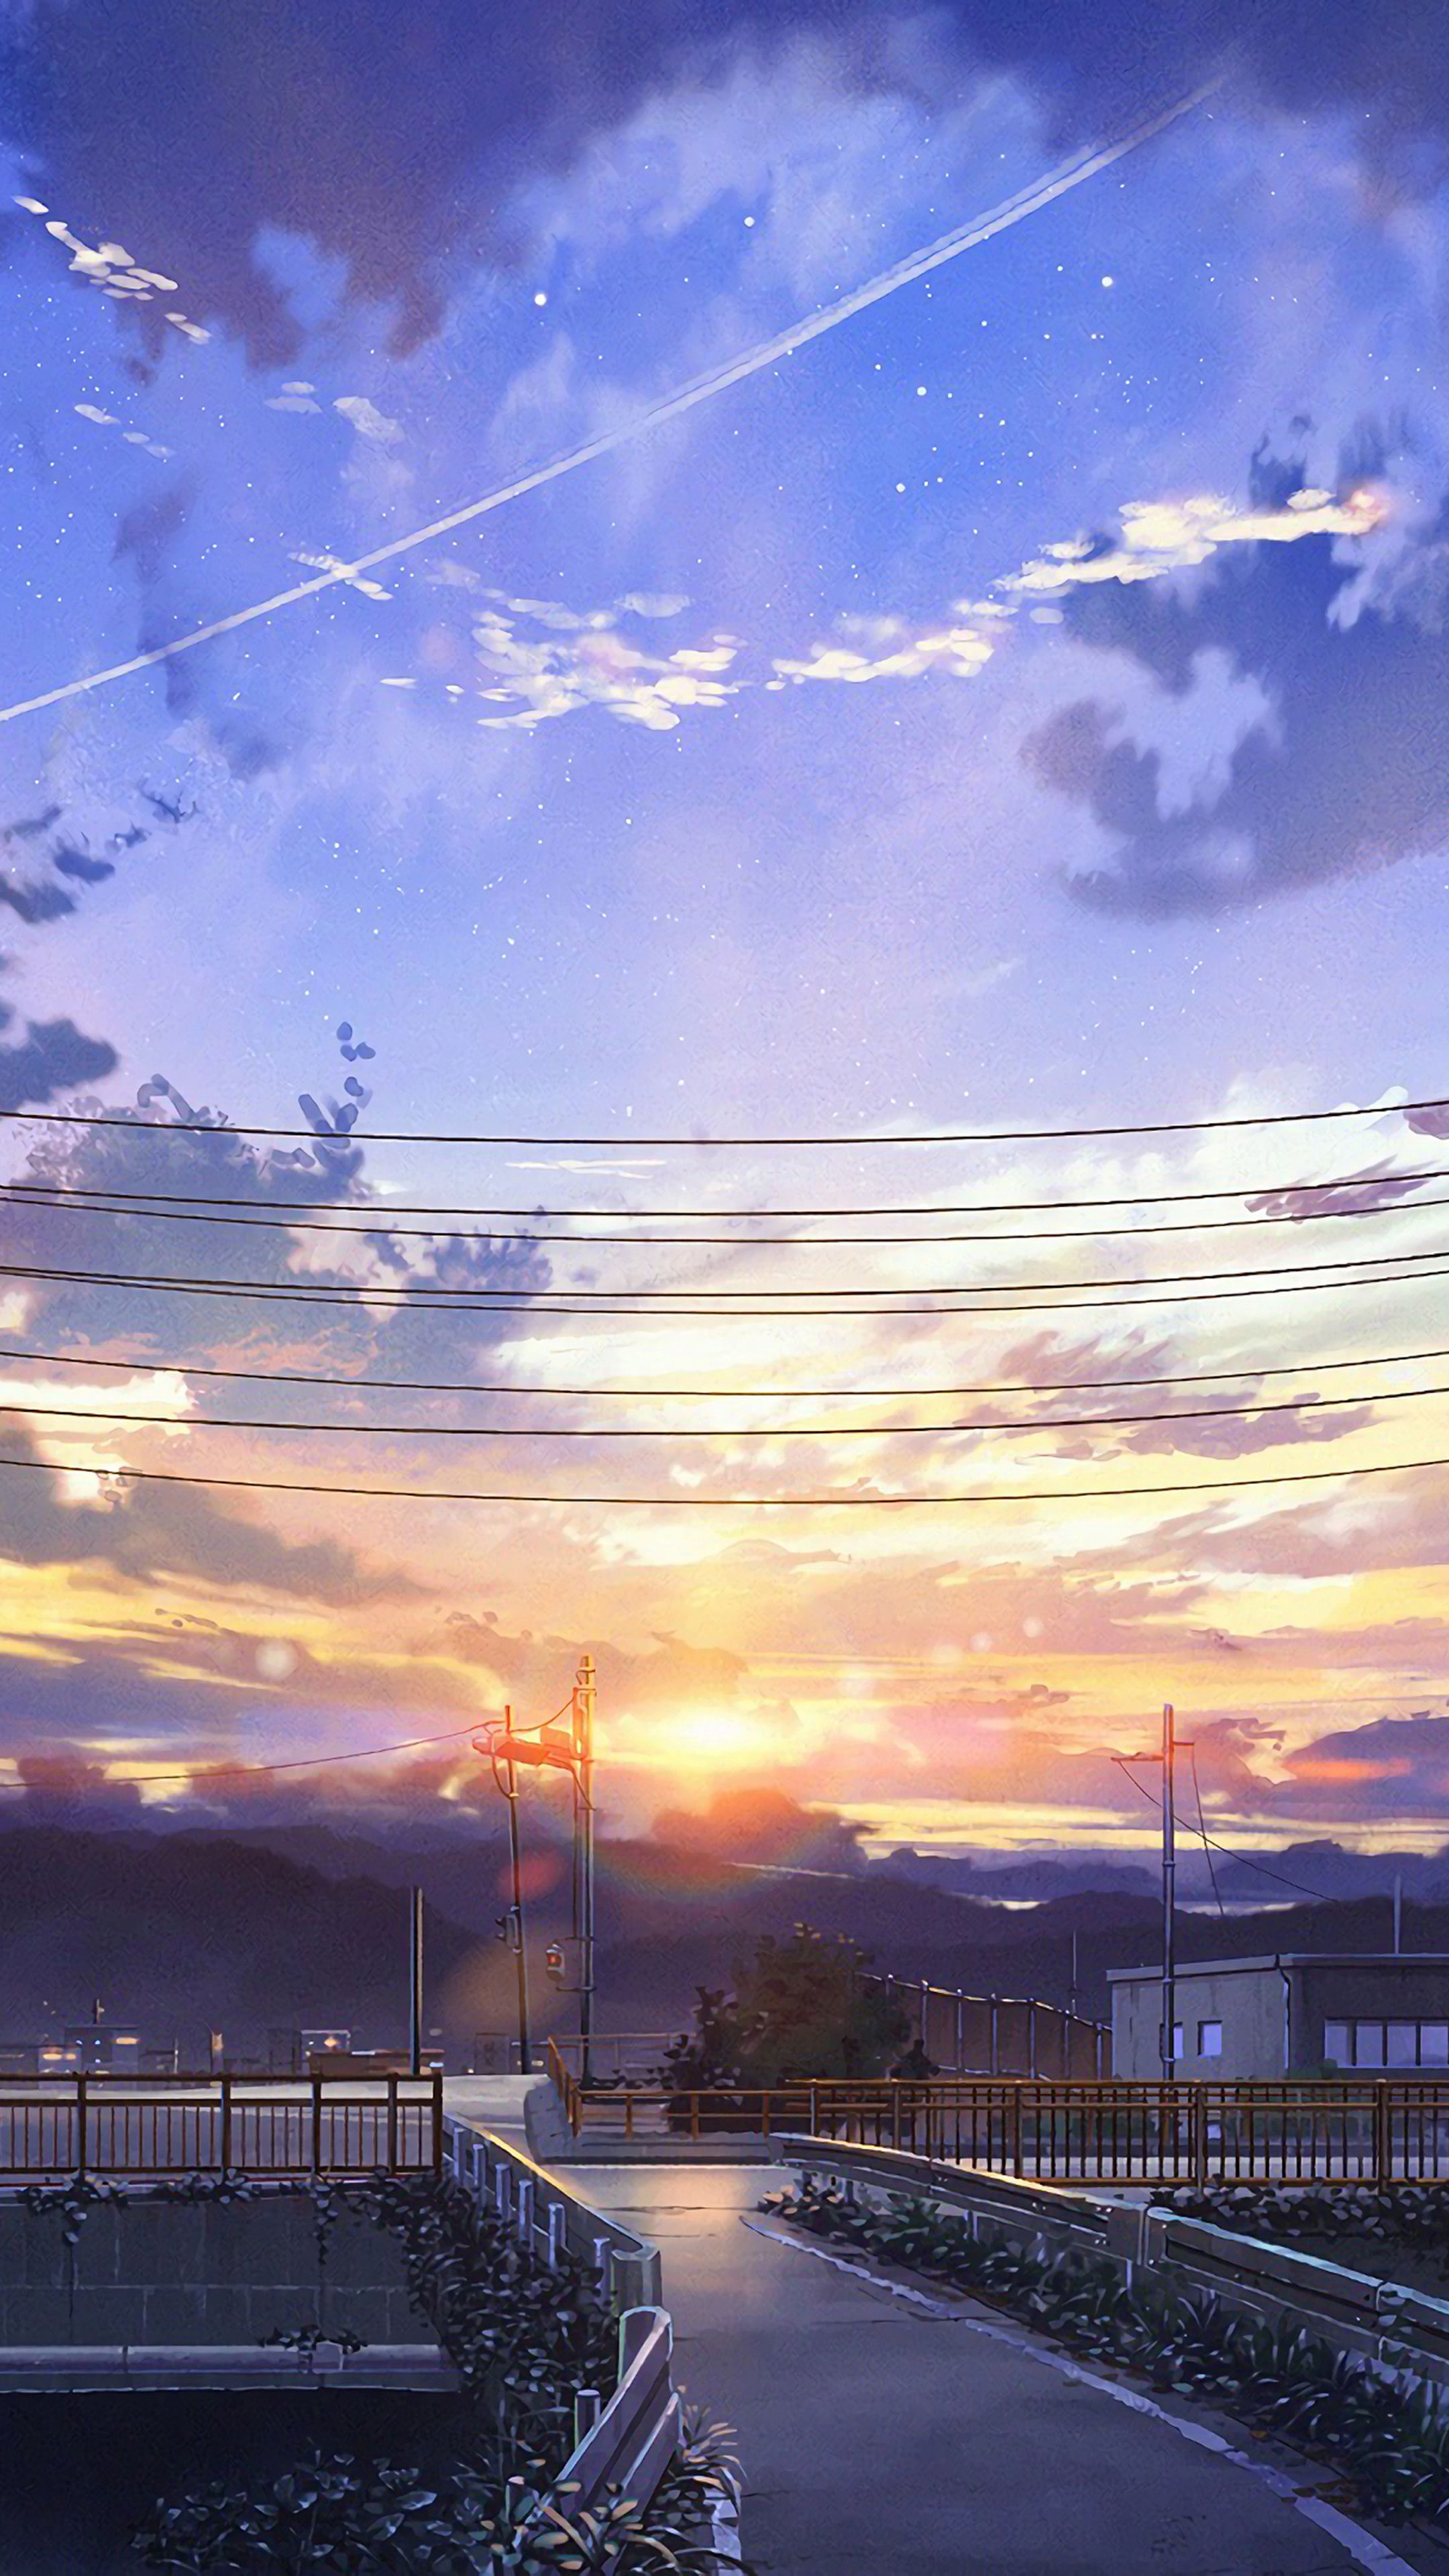 Wallpaper Anime, Art, Landscape Painting, Theatrical Scenery, Cloud,  Background - Download Free Image